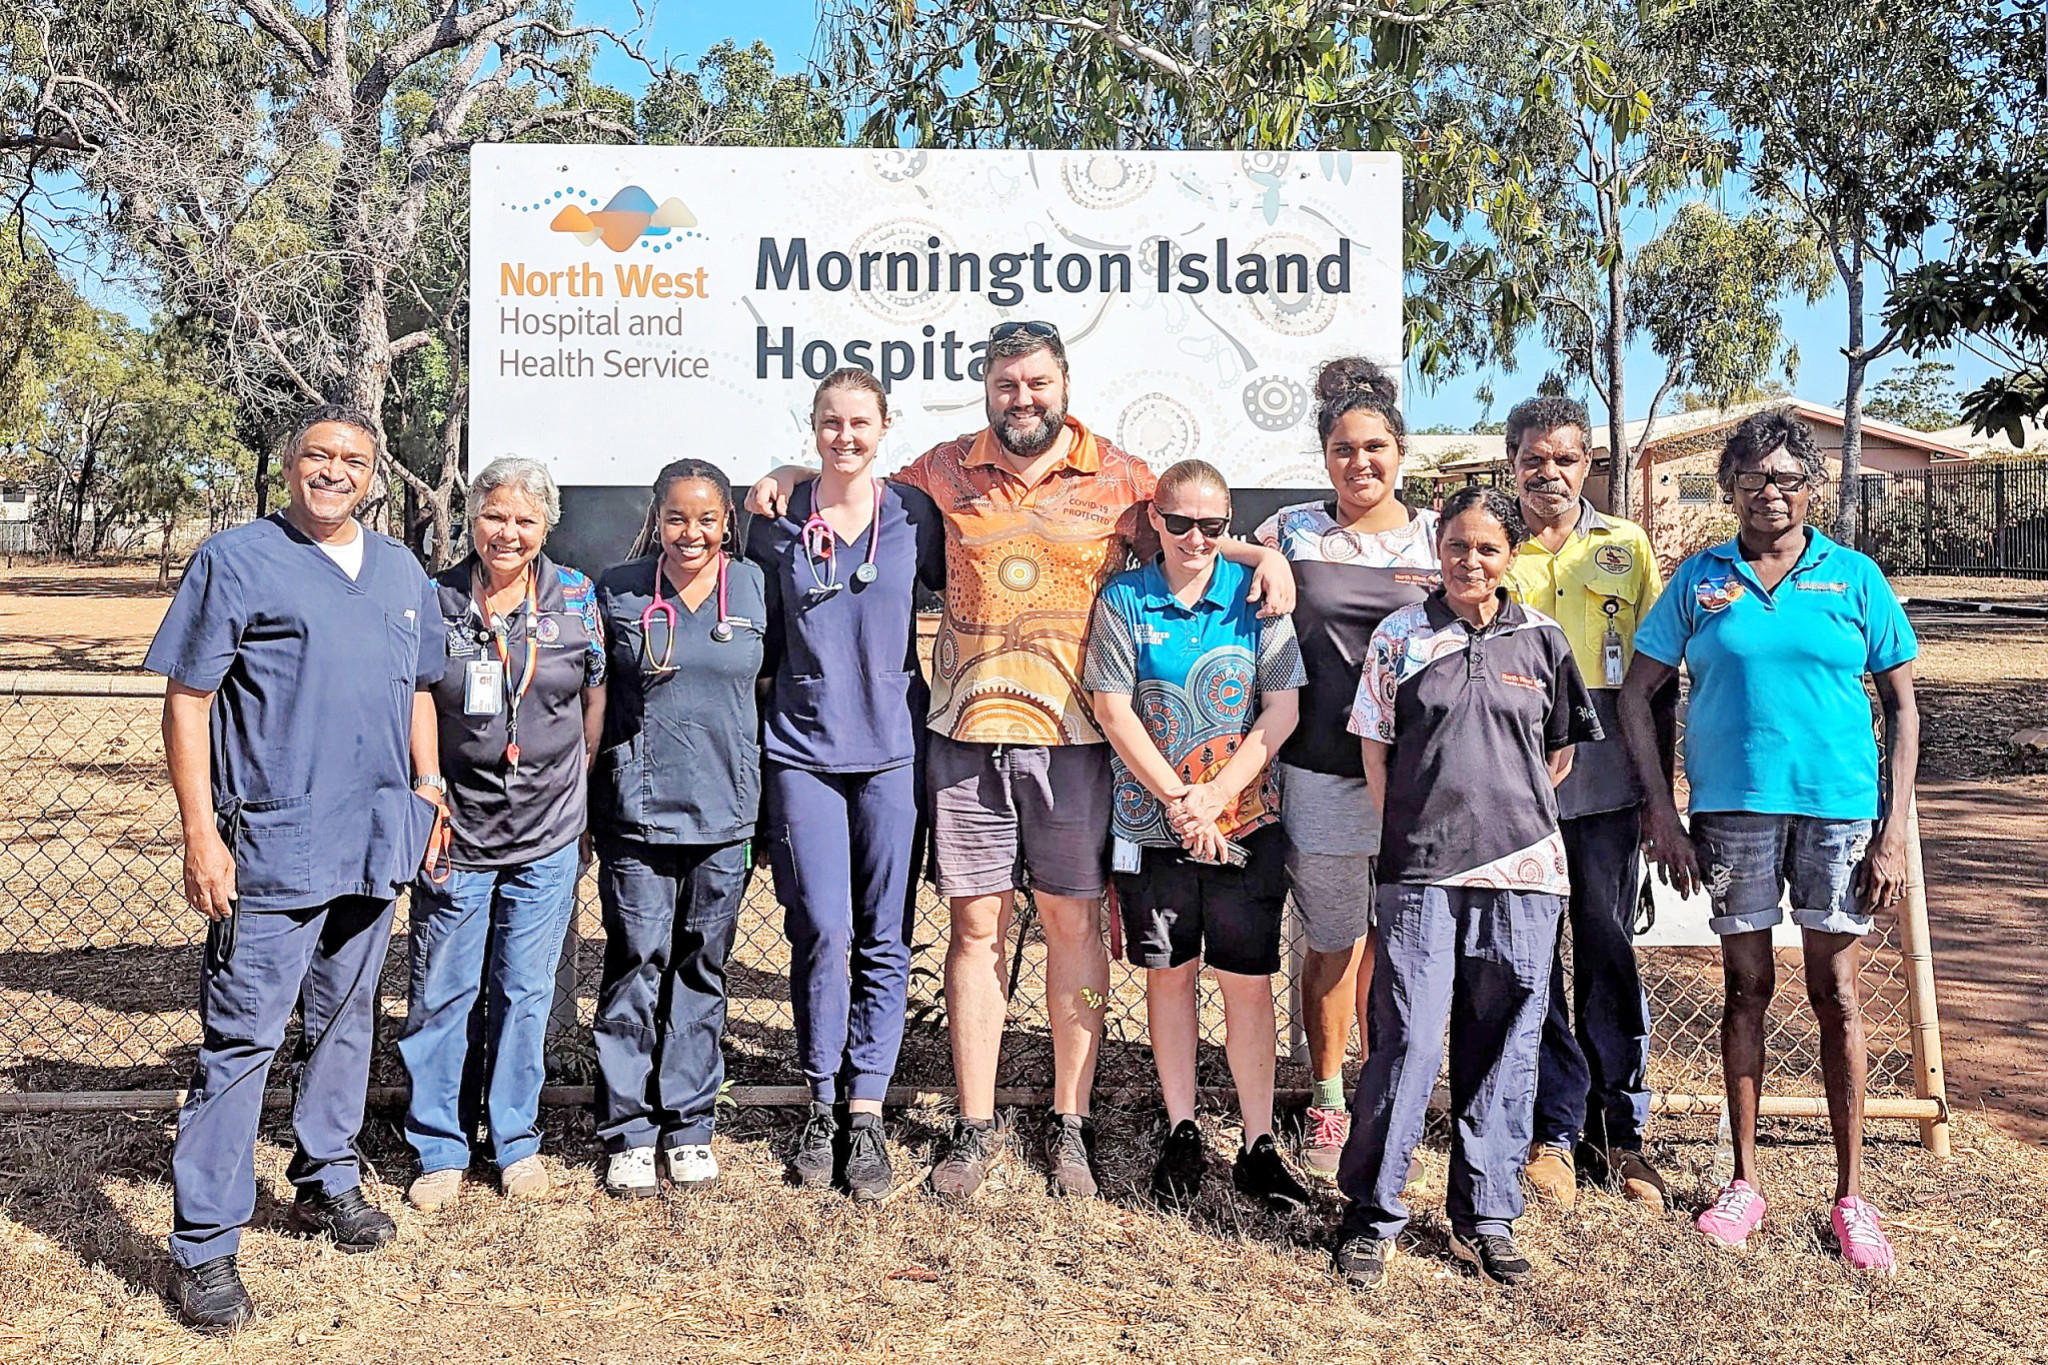 The staff at the Mornington Island Hospital are looking forward to having an additional health facility in the community.